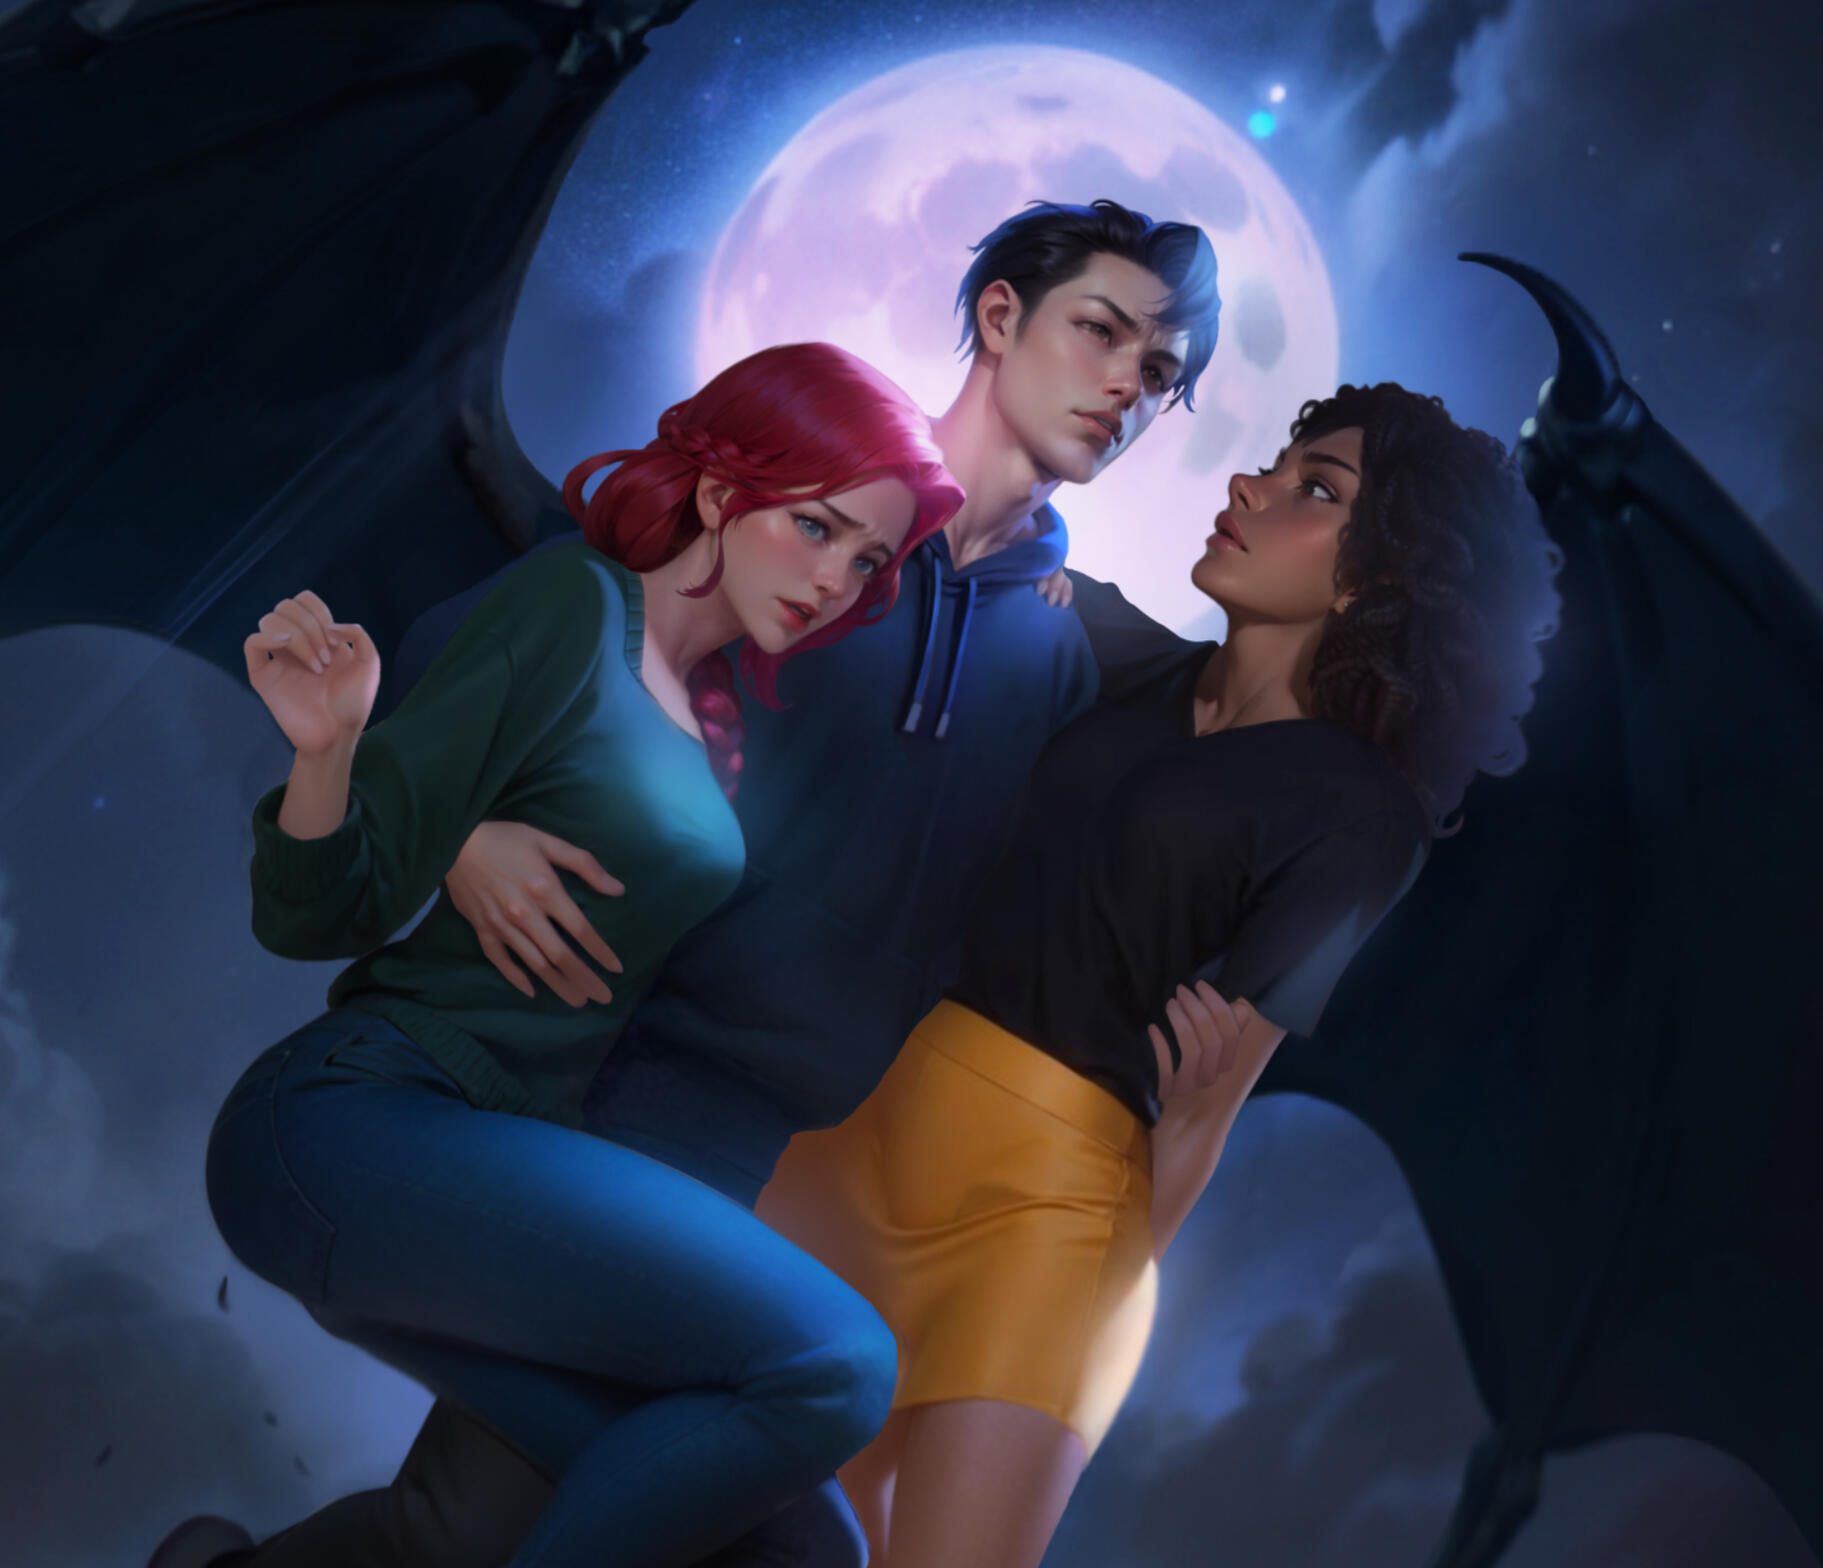 an illustration of emrys, a man with dark hair, dark clothes, and bat-like wings flying in a moonlit sky with two others: Eva, a woman with red hair and a green sweater, and Bobbi, a Black woman with a black and yellow dress